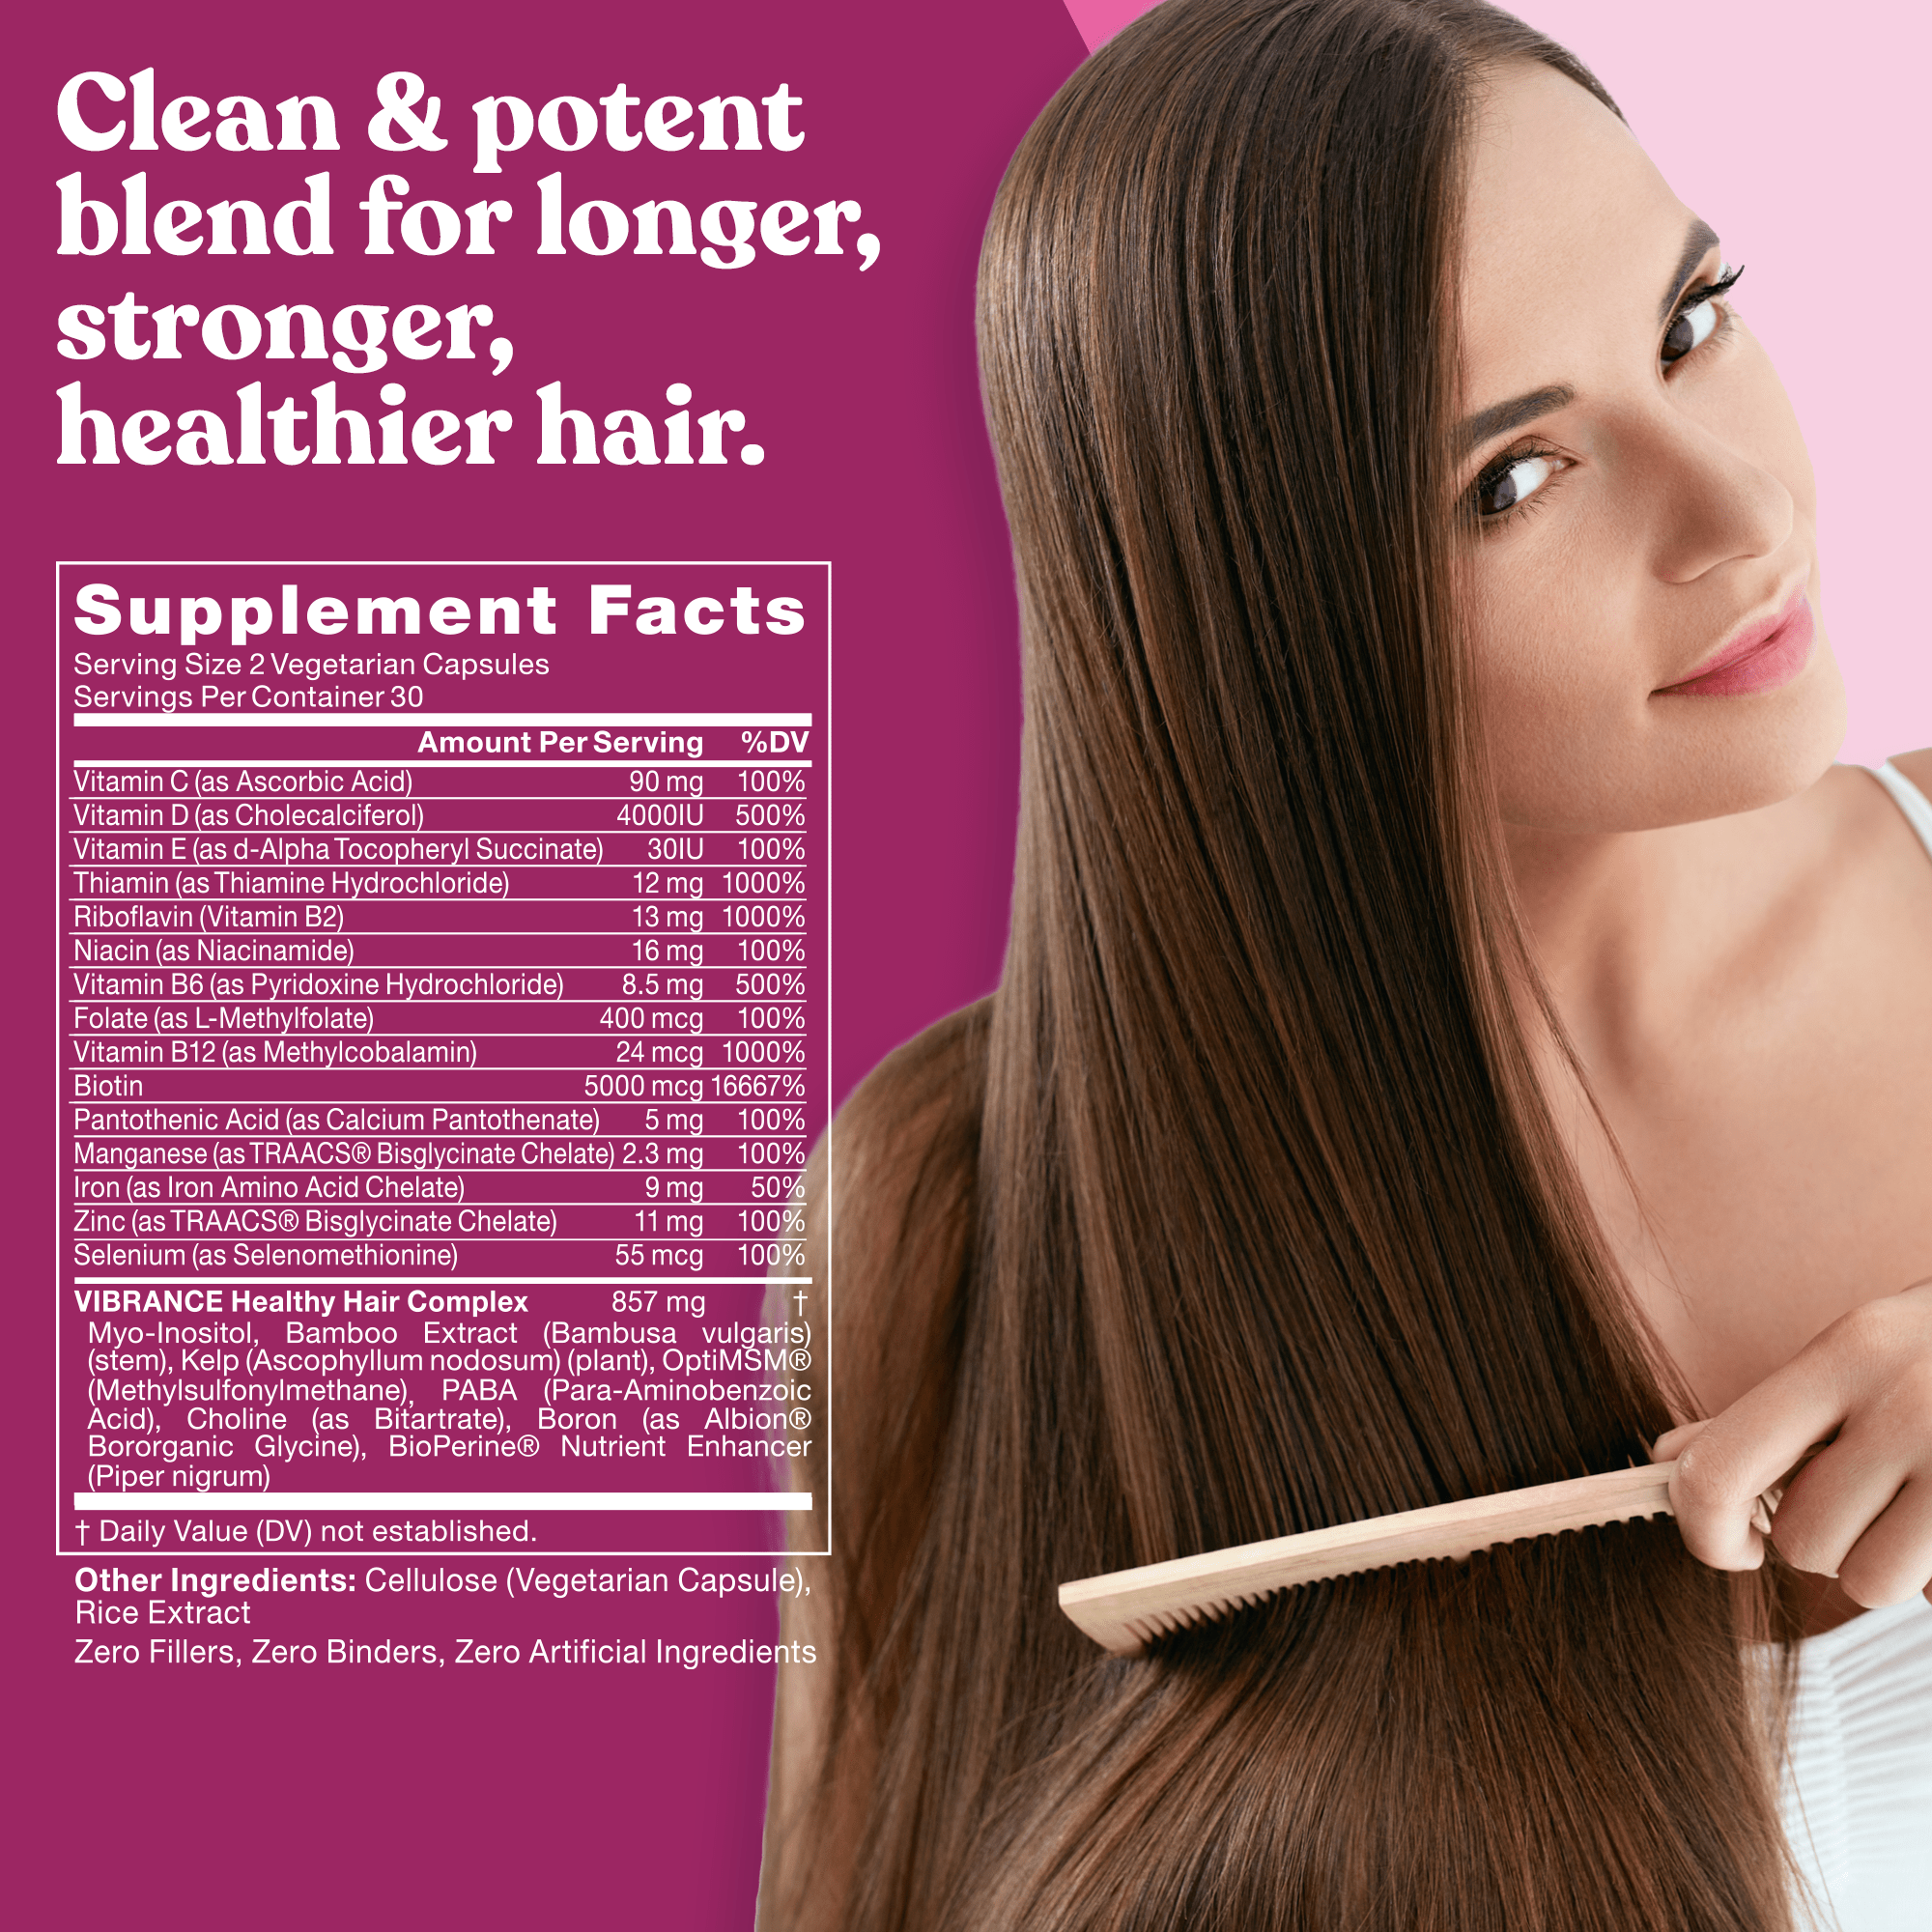 12 Foods for Strong Healthy Hair Growth - Nourish - Health Food Store